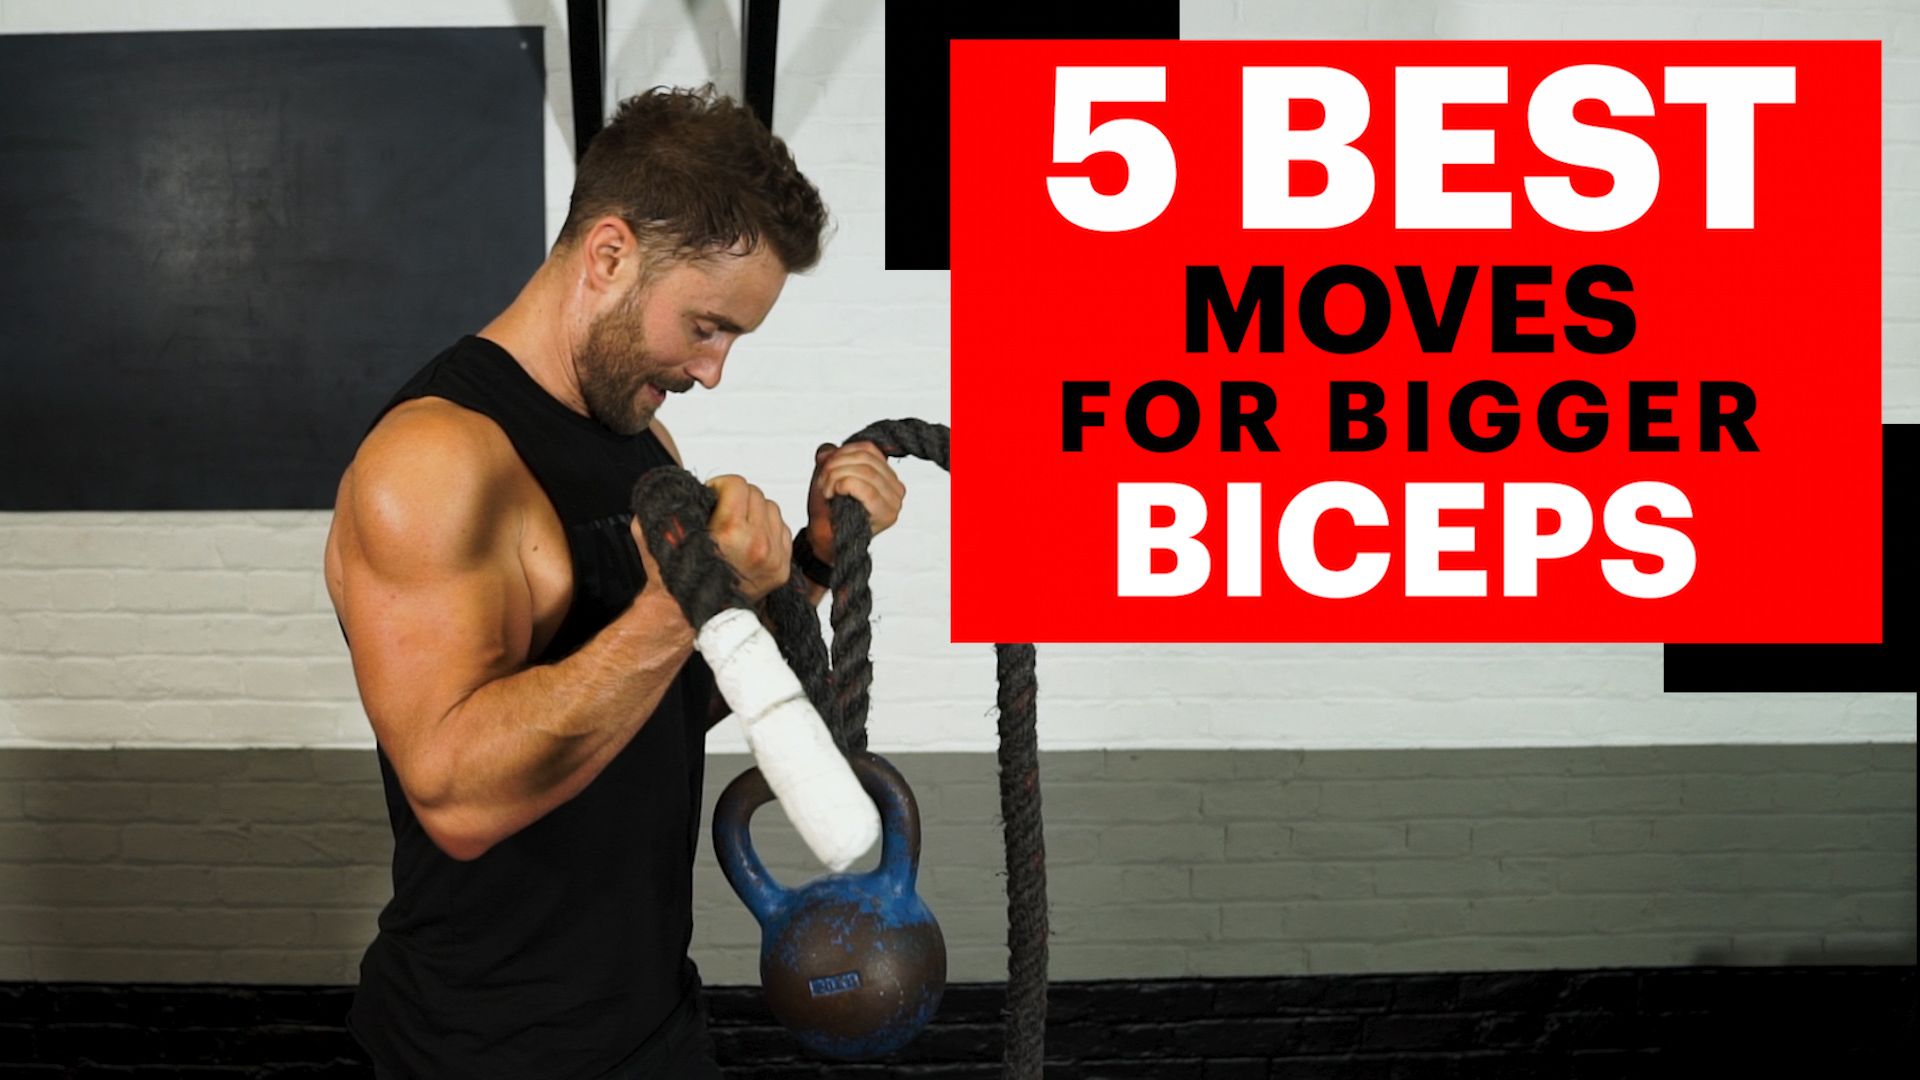 How To Build My Biceps